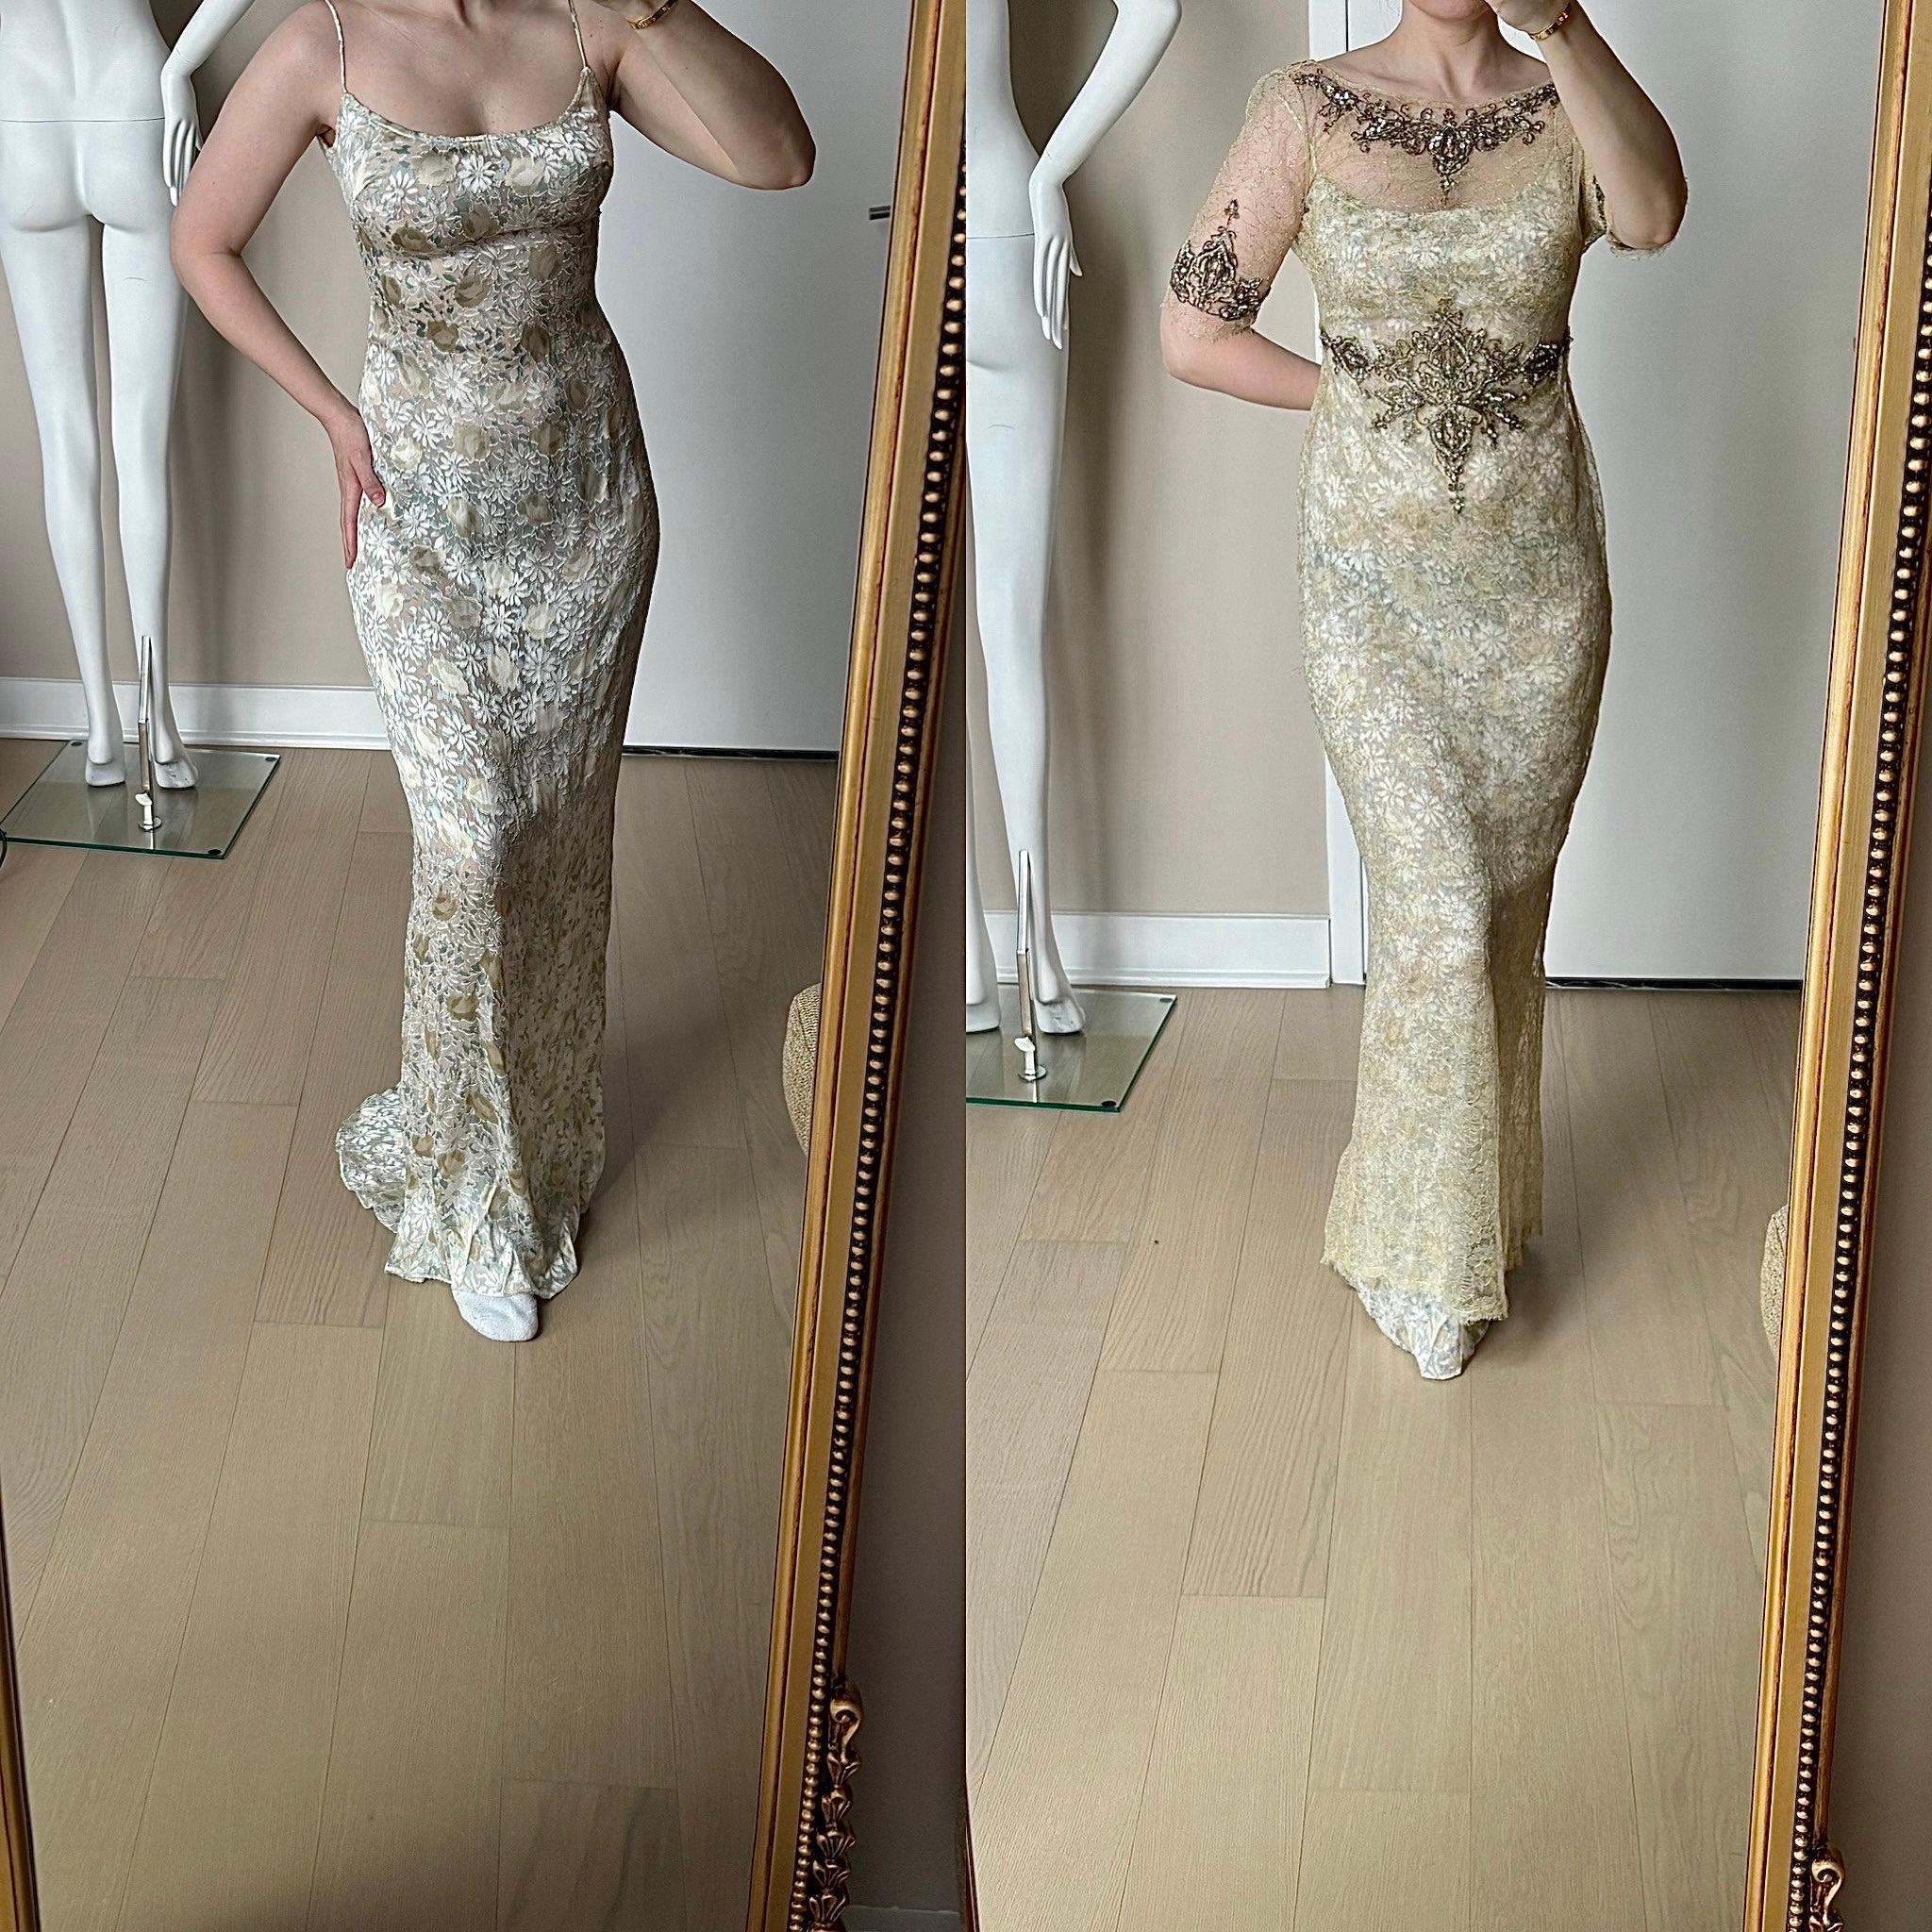 Badgley Mischka
Vintage
USA size 6, fits like a size 4
Excellent Condition

Vintage Badgley Mischka dresses are literal works of art. They rival your favorites for sure.

The slip dress is semi velvet and so light, and the ornate lace overlay is